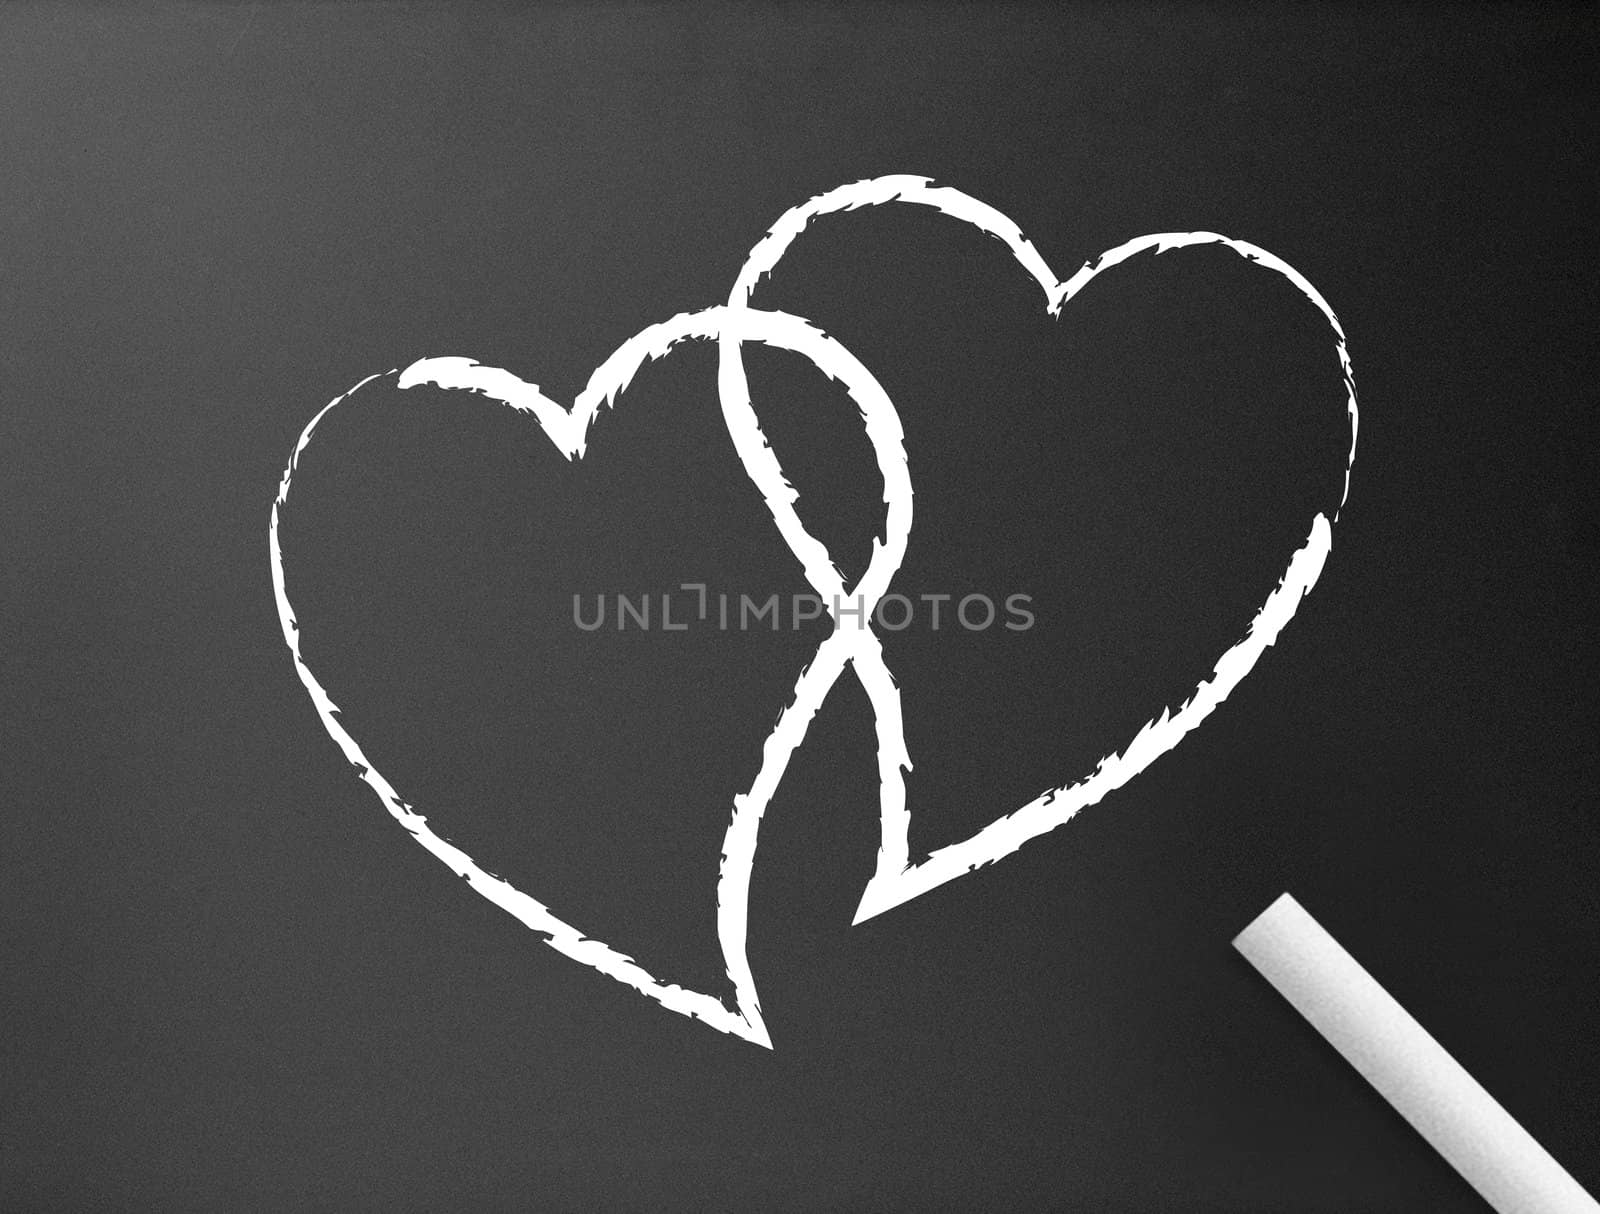 Dark chalkboard background with two hearts illustration. 